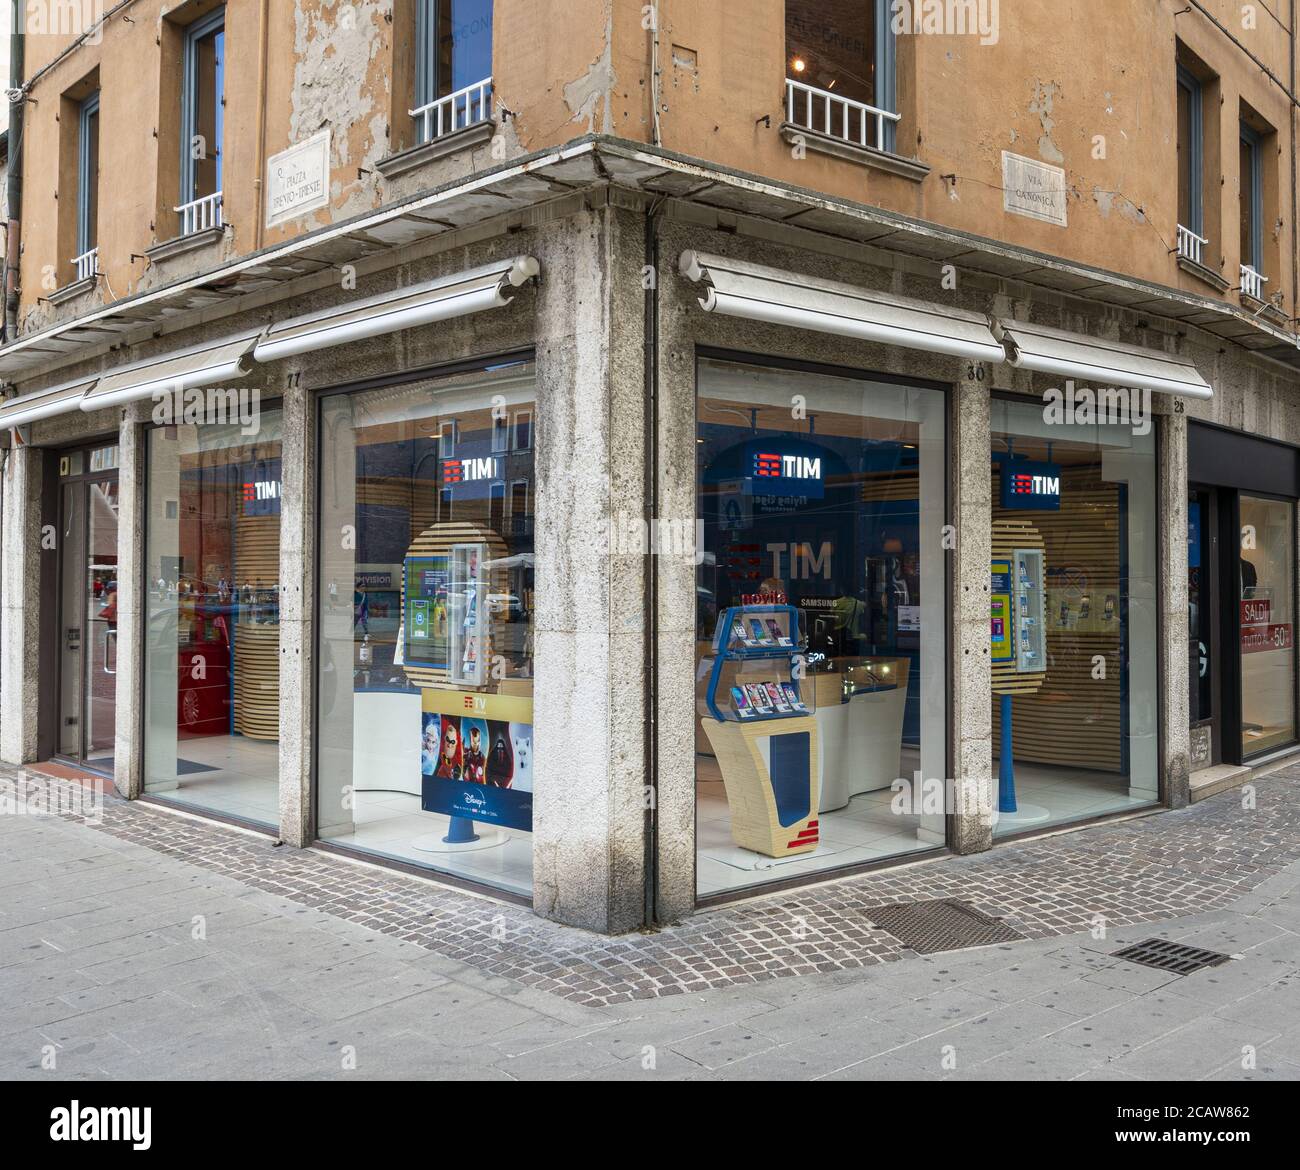 Ferrara, Italy. August 6, 2020. The shop window of the TIM brand shop in the center of Ferrara, Italy Stock Photo